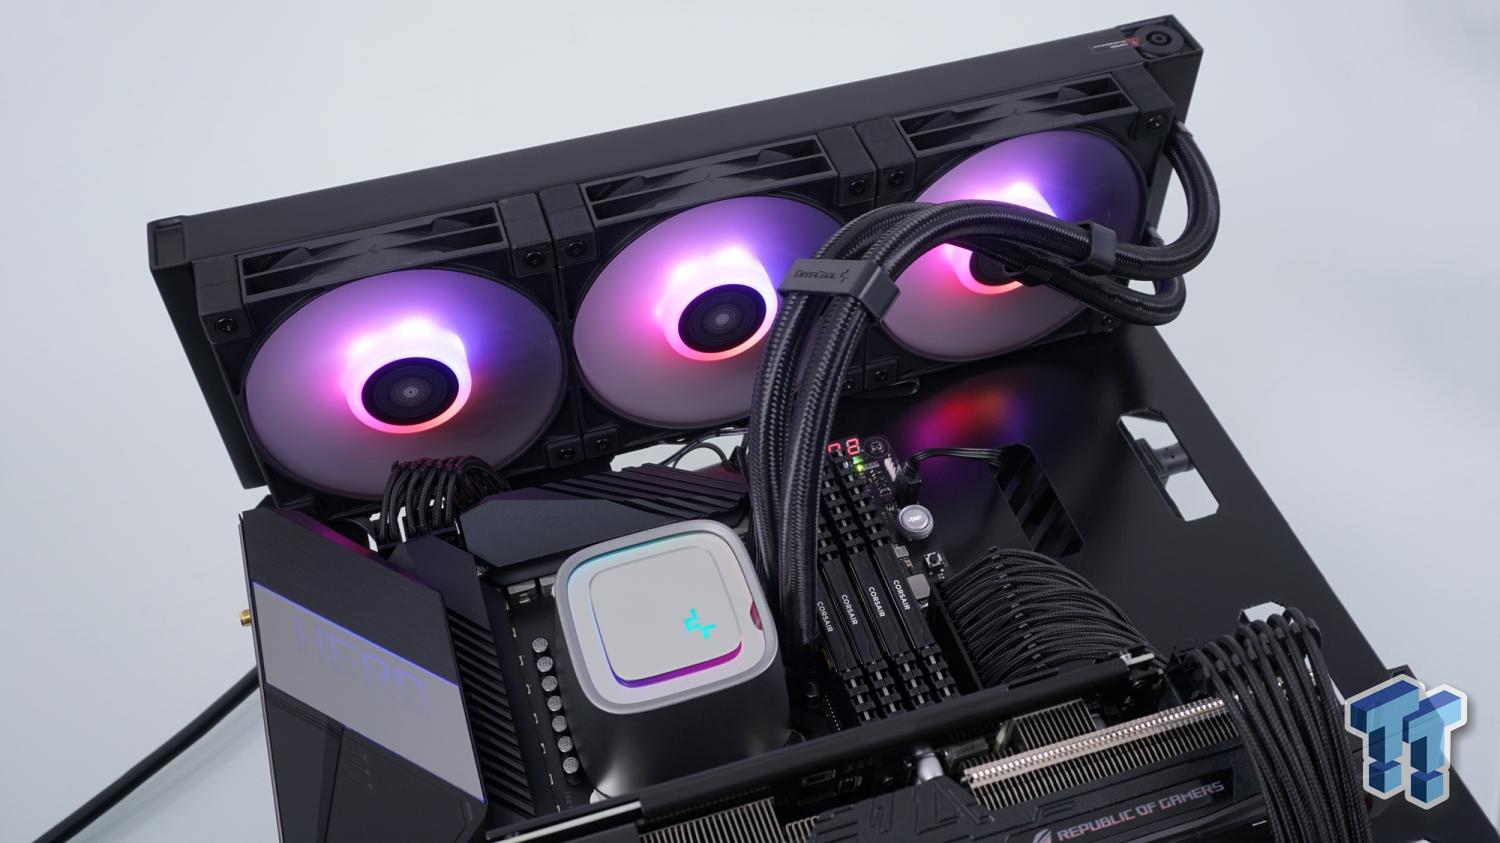 DeepCool LT720 in test - liquid cooling with Infinity effect!